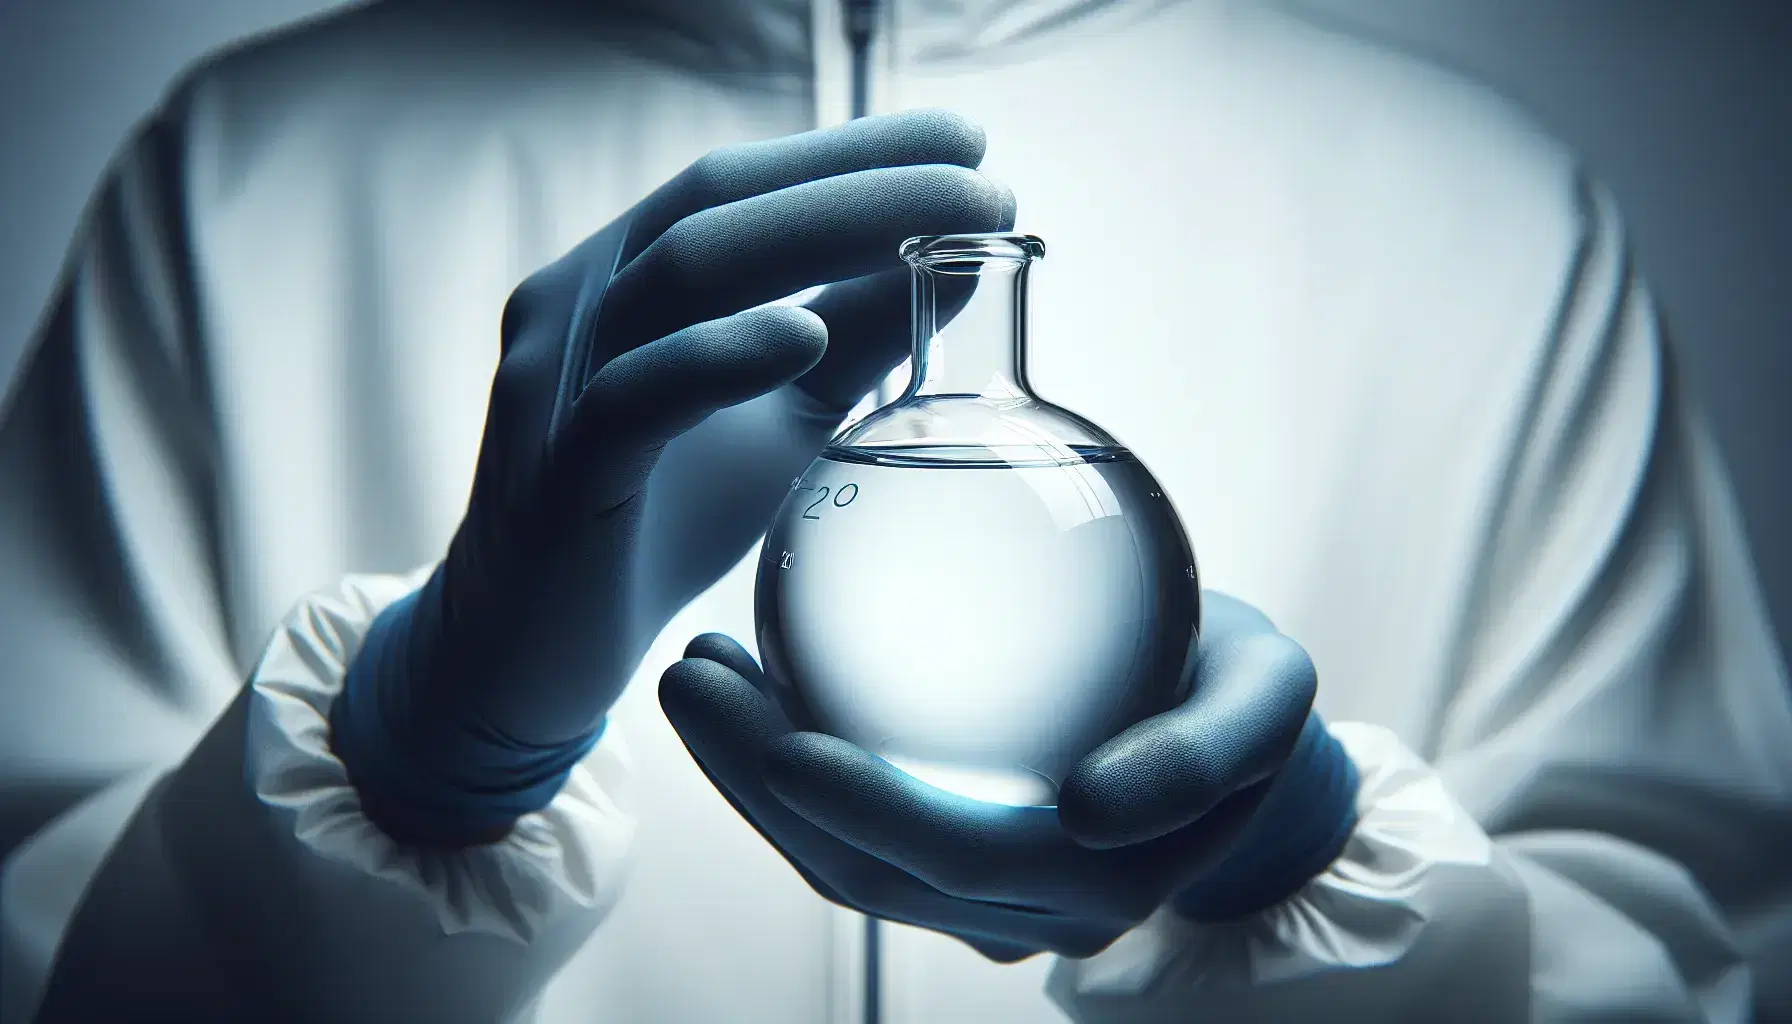 Hands in blue gloves carefully holding a clear glass flask with transparent liquid in a laboratory setting, against a white background.